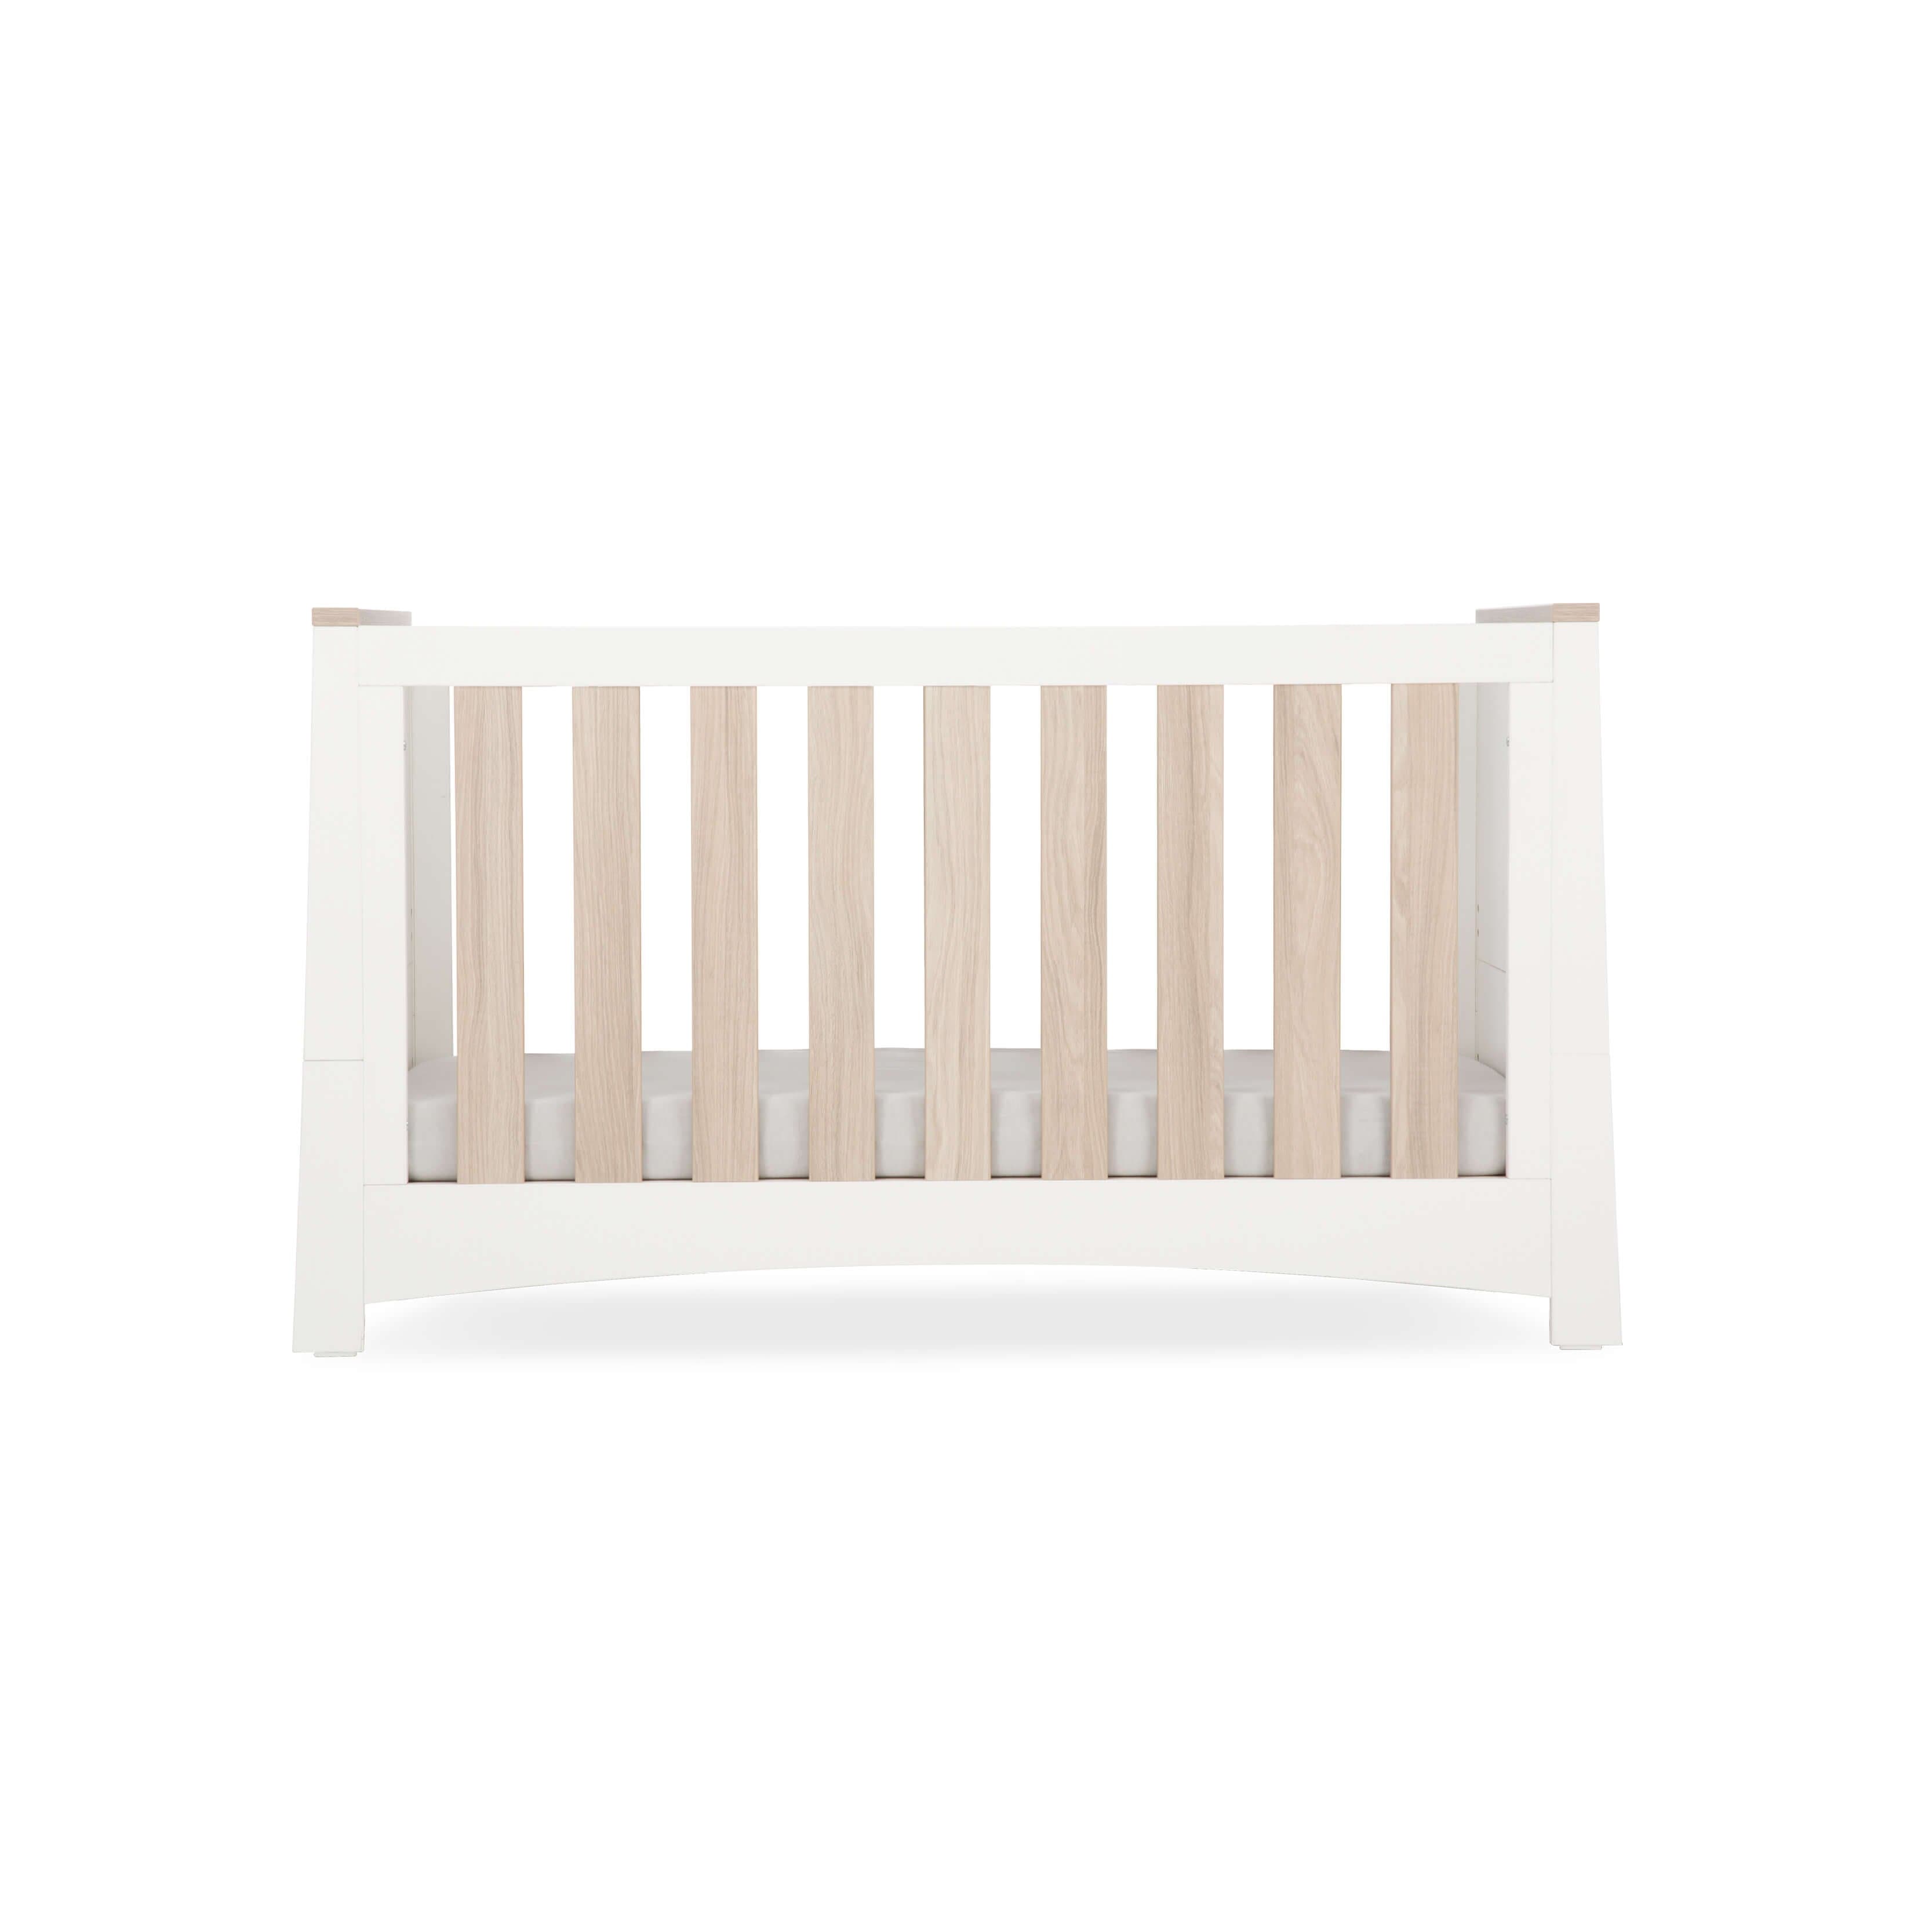 Cuddleco Ada 3 Piece Nursery Furniture Set - White & Ash -  | For Your Little One